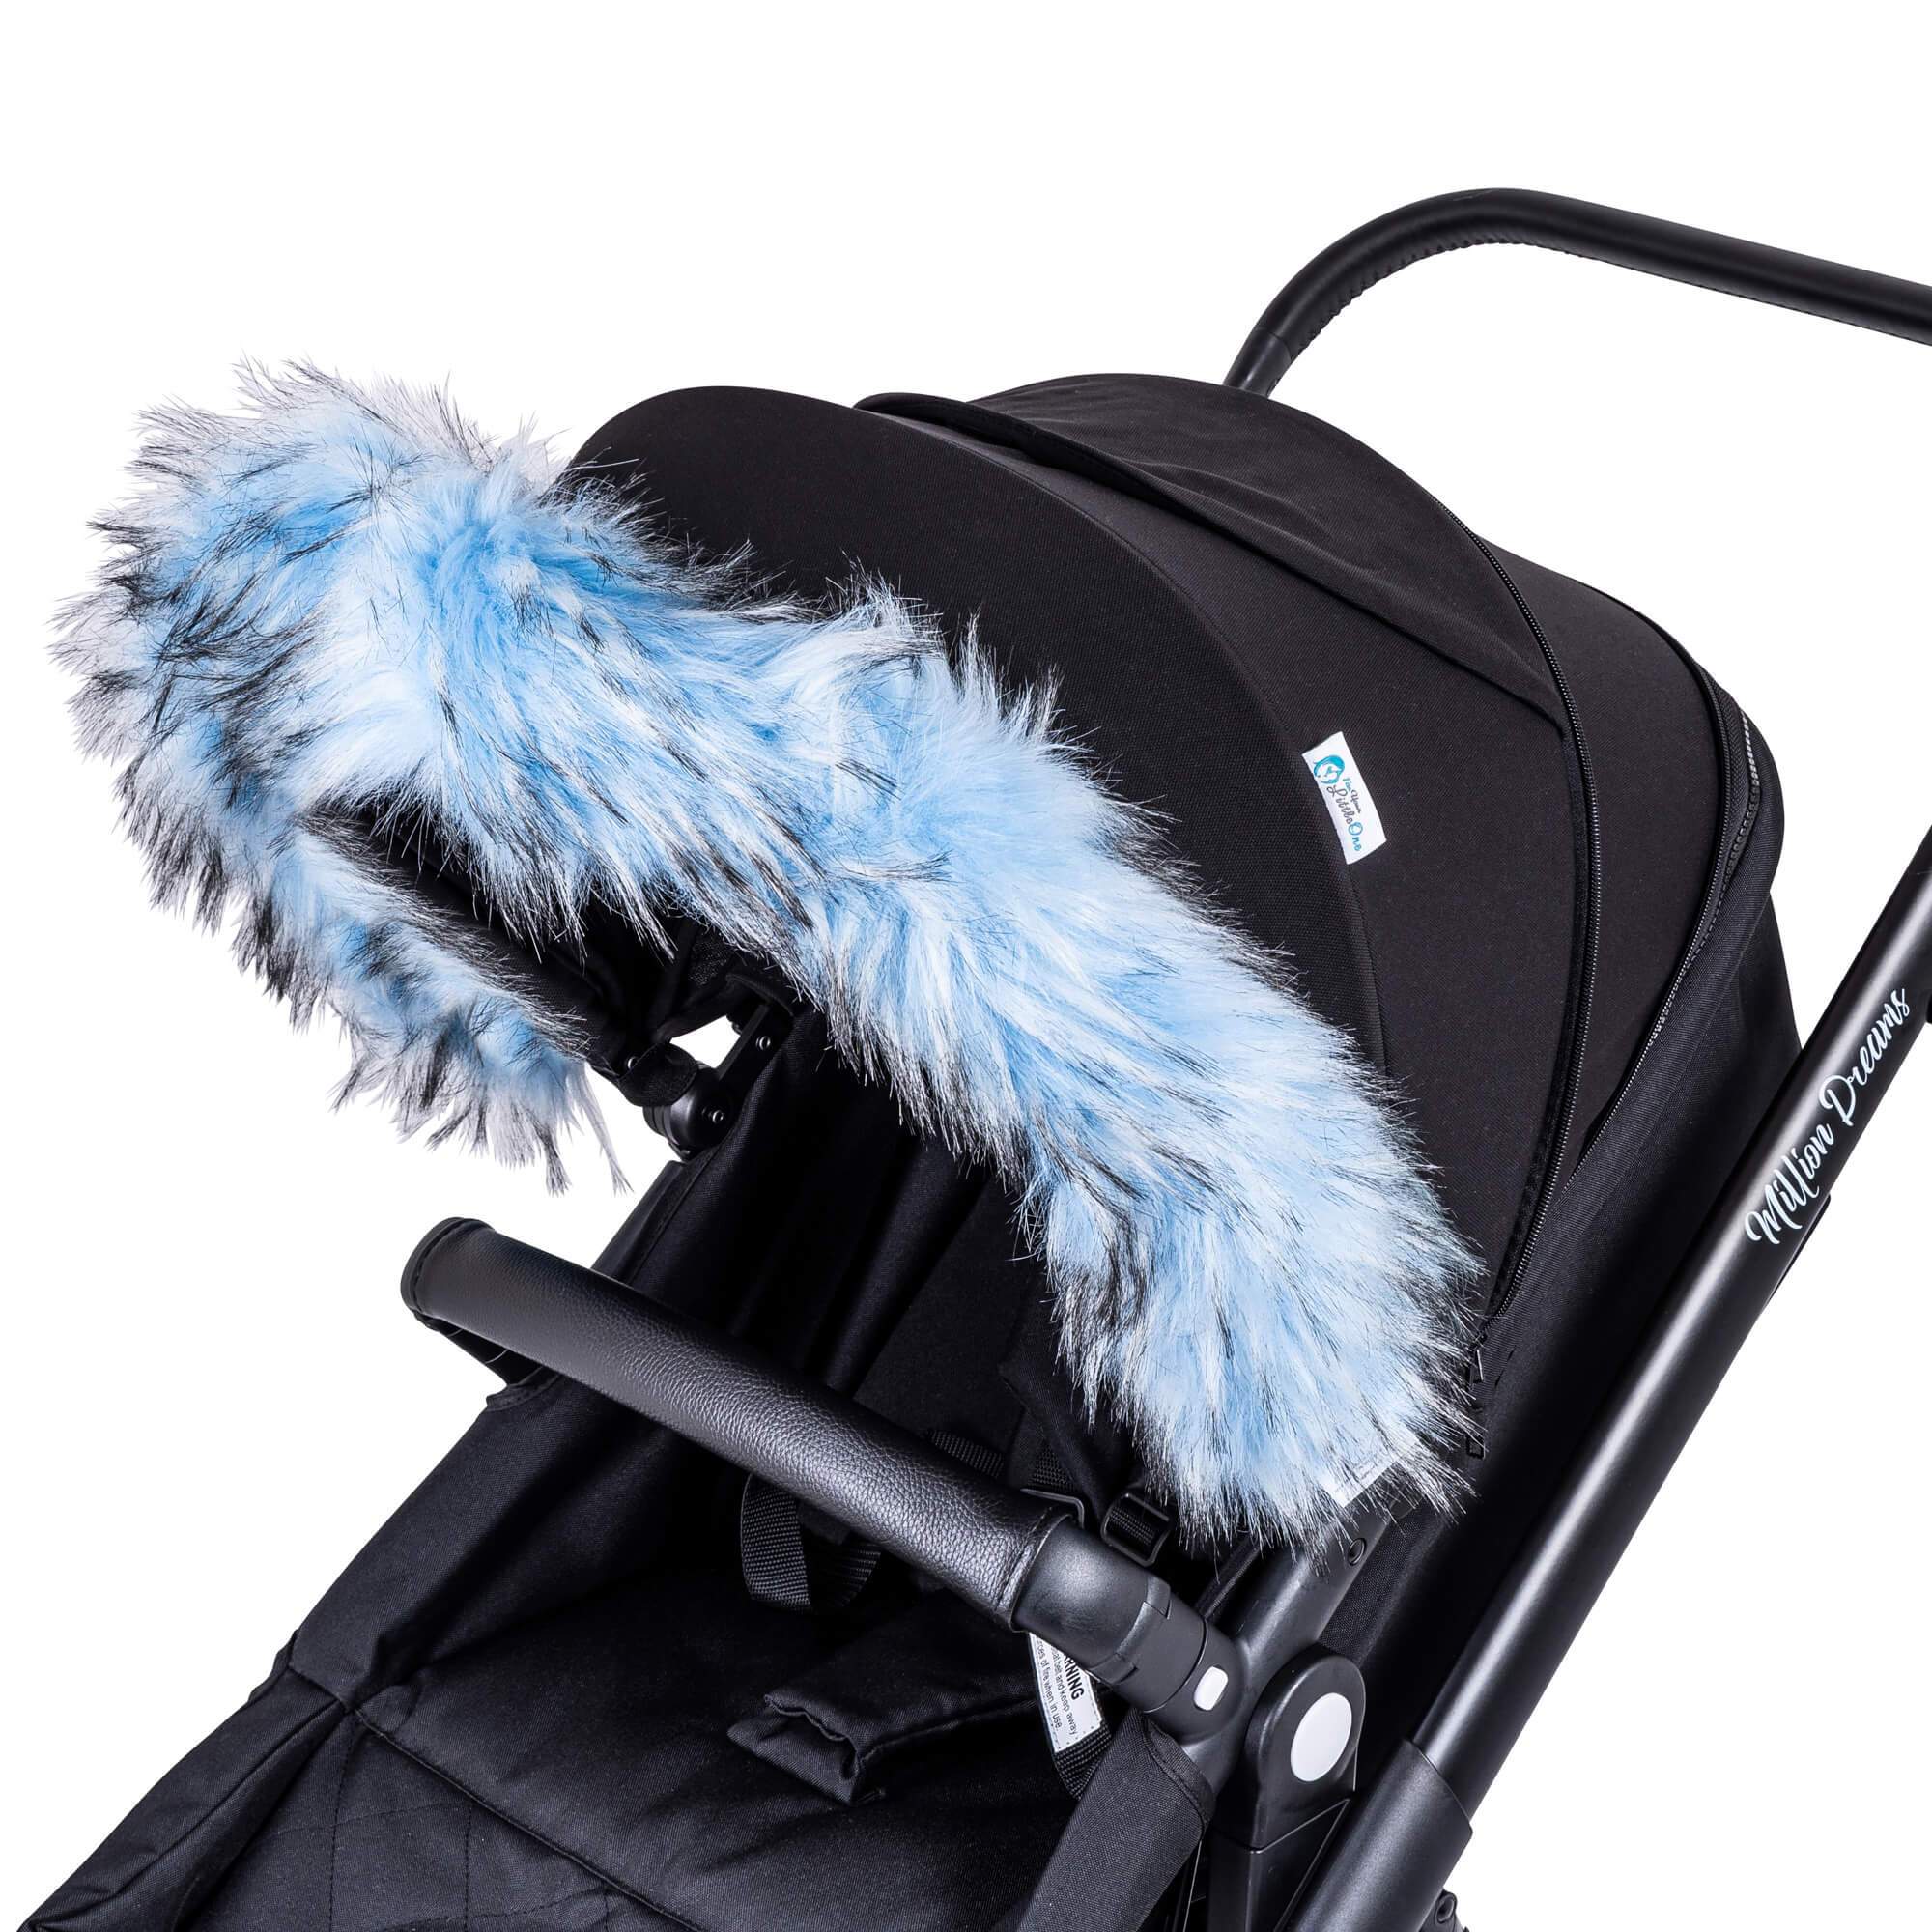 Pram Fur Hood Trim Attachment for Pushchair - For Your Little One